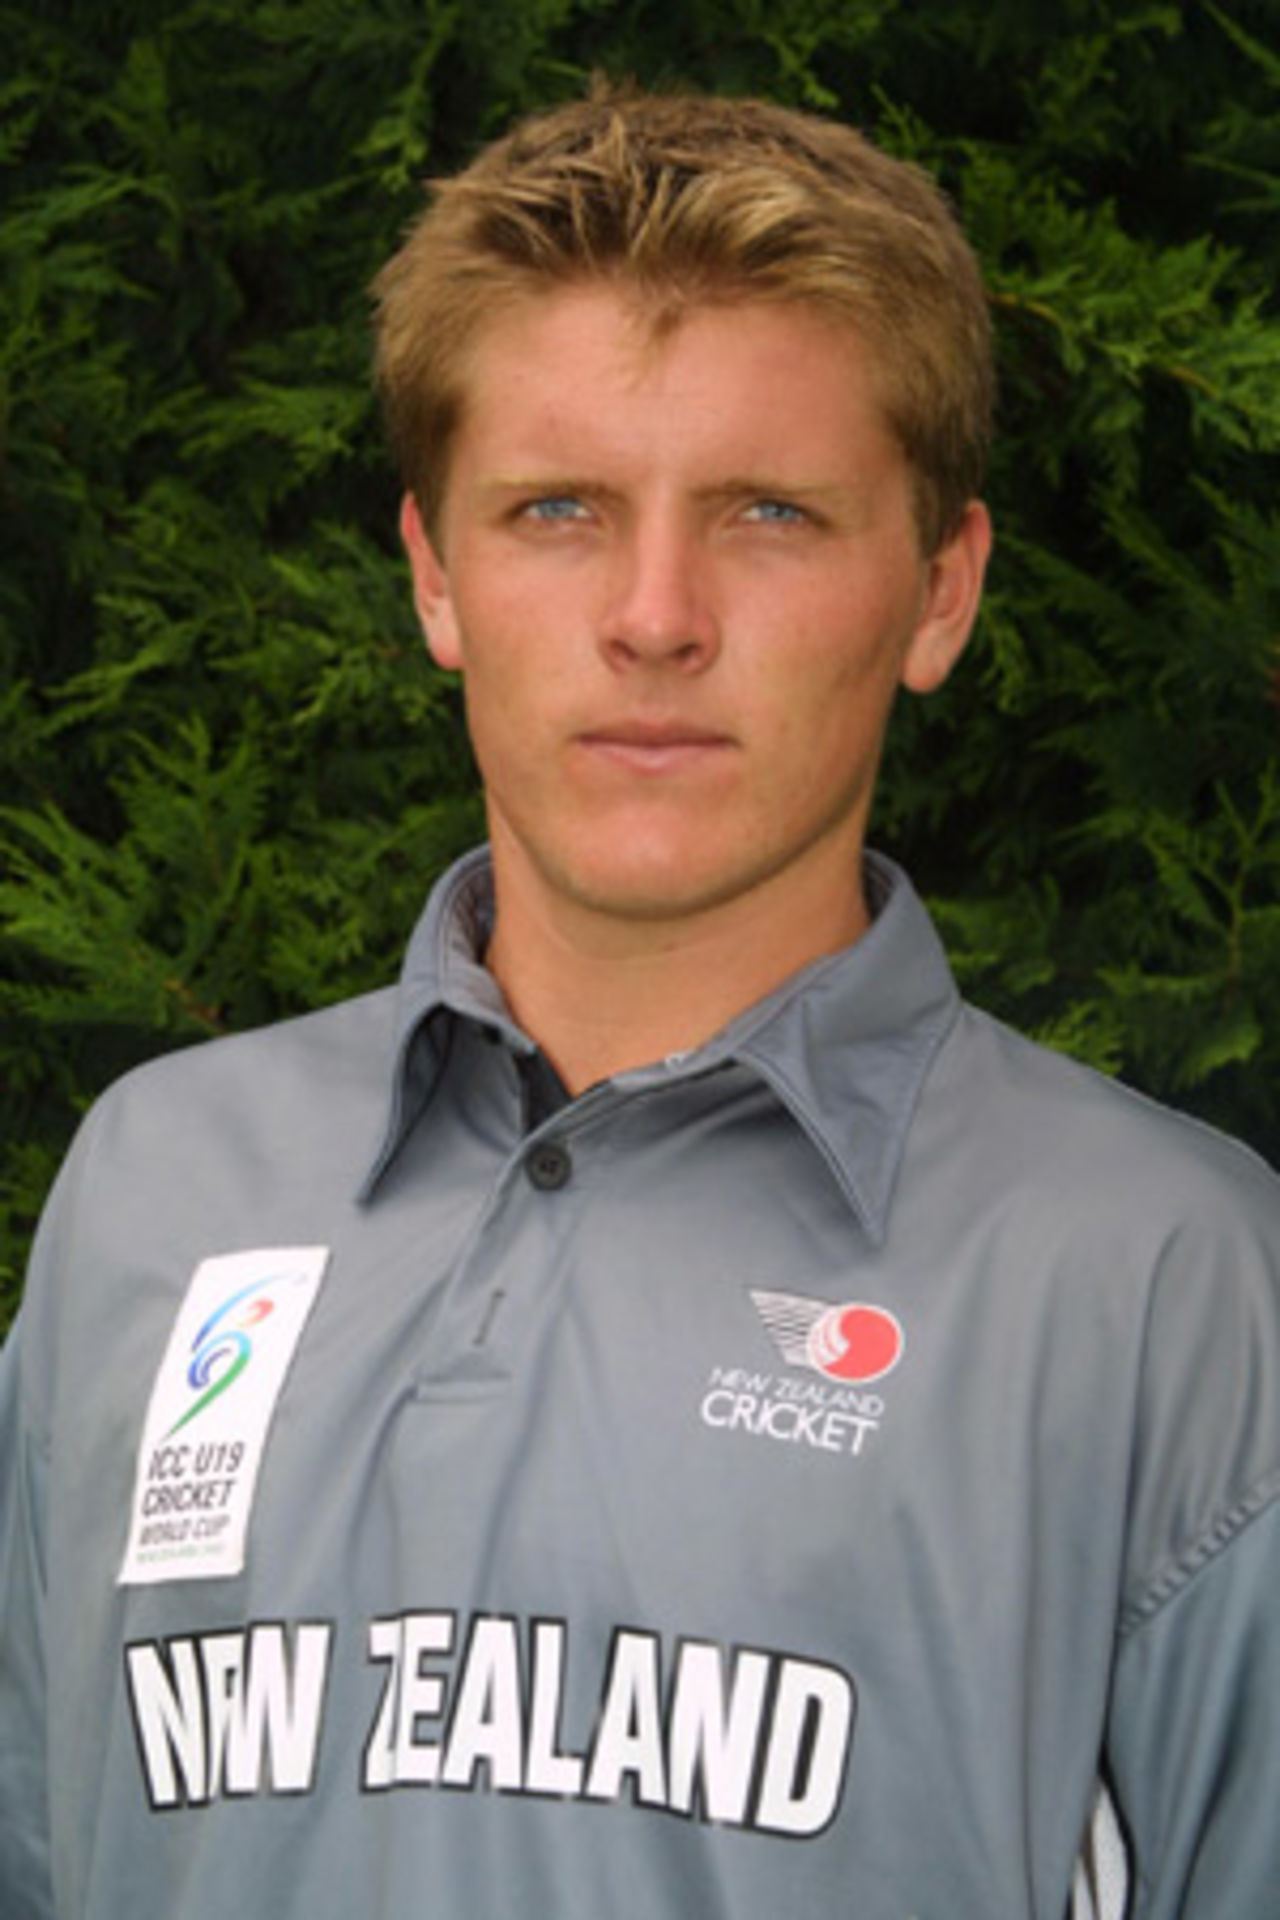 Portrait of Michael Bates, January 2002 - New Zealand Under-19 player for the ICC Under-19 World Cup 2002.